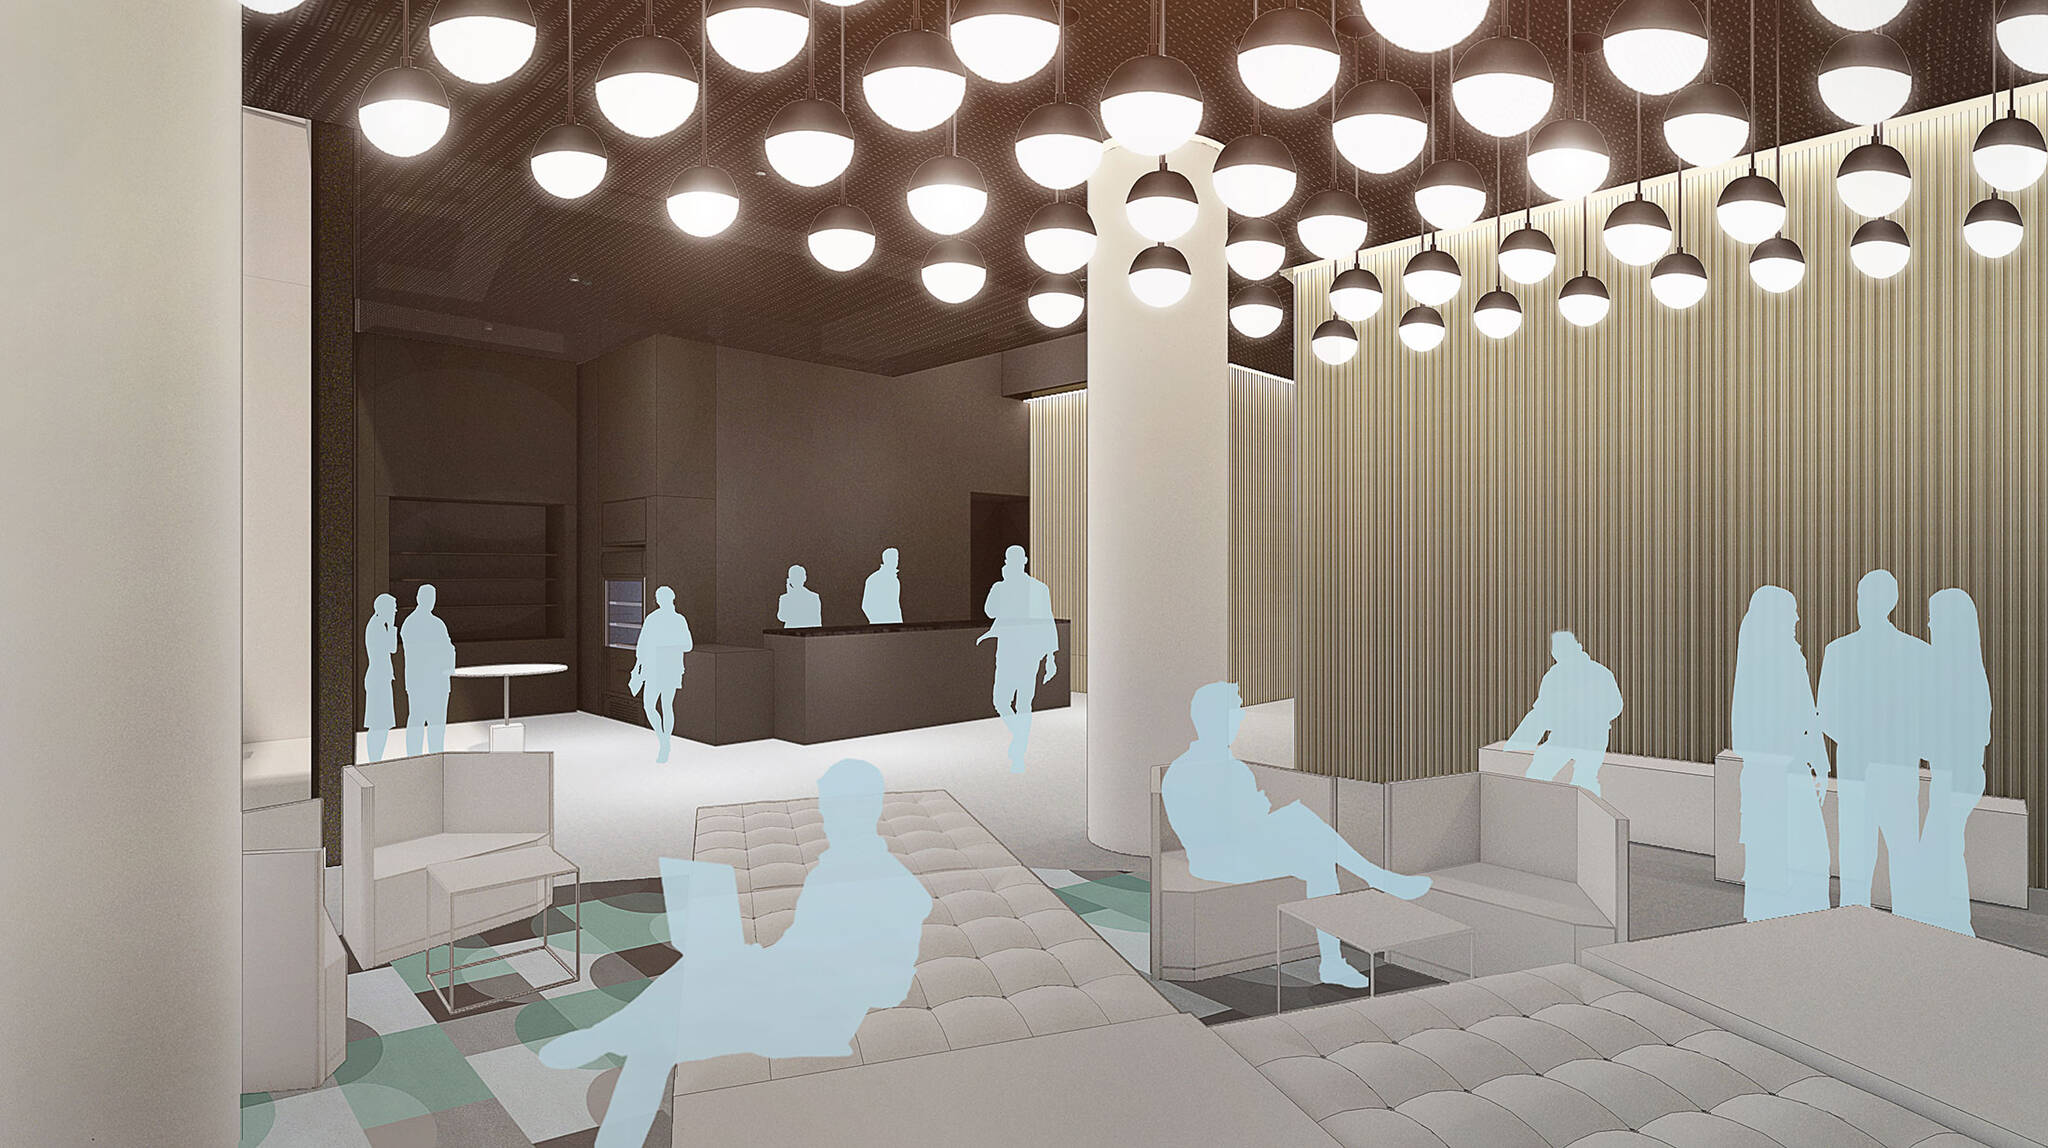 Interior walkthrough of the Modular AC Hotel project located at 842 Sixth Avenue in NoMad, New York City designed by the architecture studio Danny Forster & Architecture